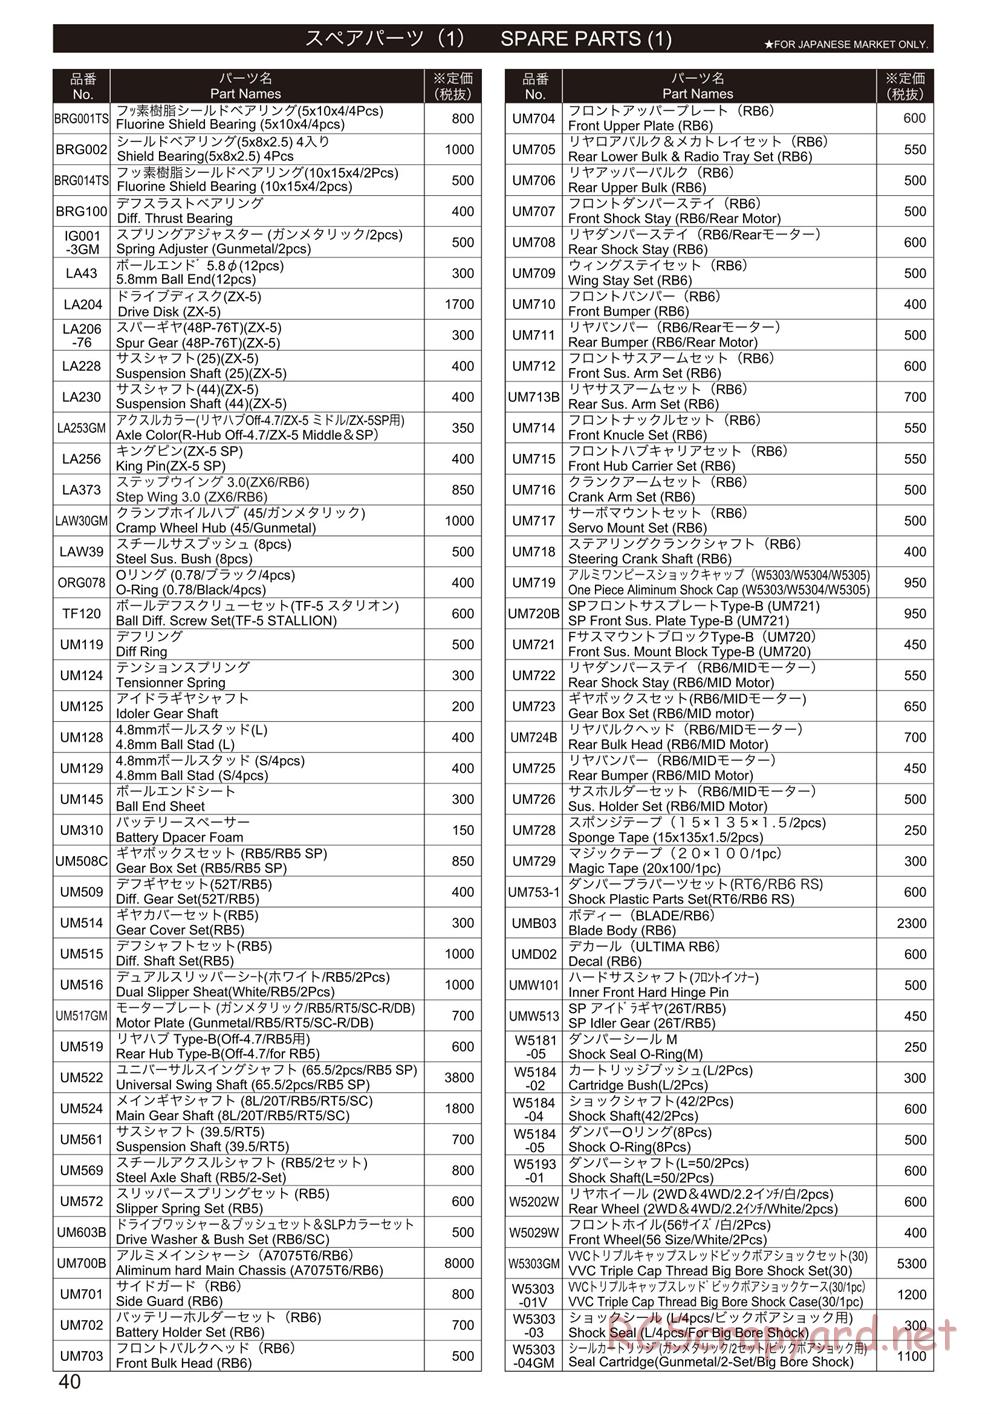 Kyosho - Ultima RB6 (2015) - Parts List - Page 1